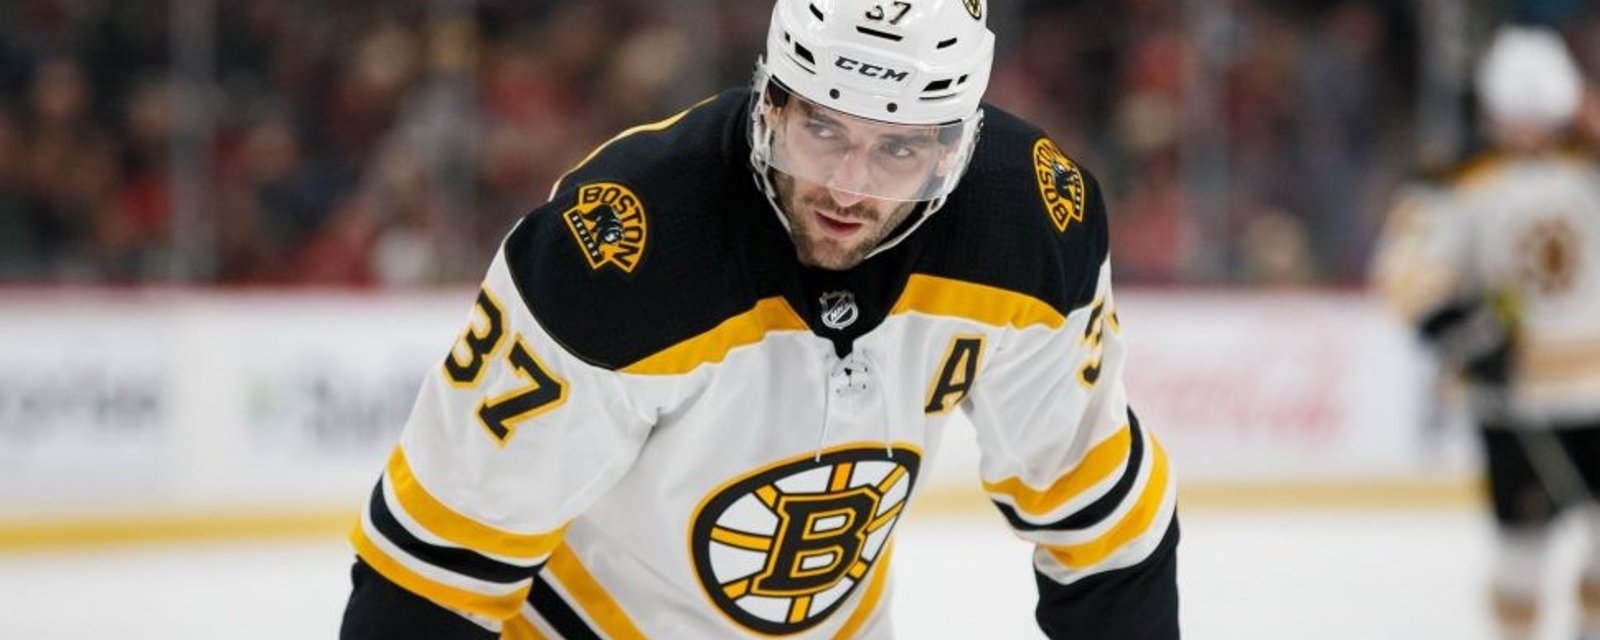 Significant changes to Bruins' lineup as Bergeron misses practice! 